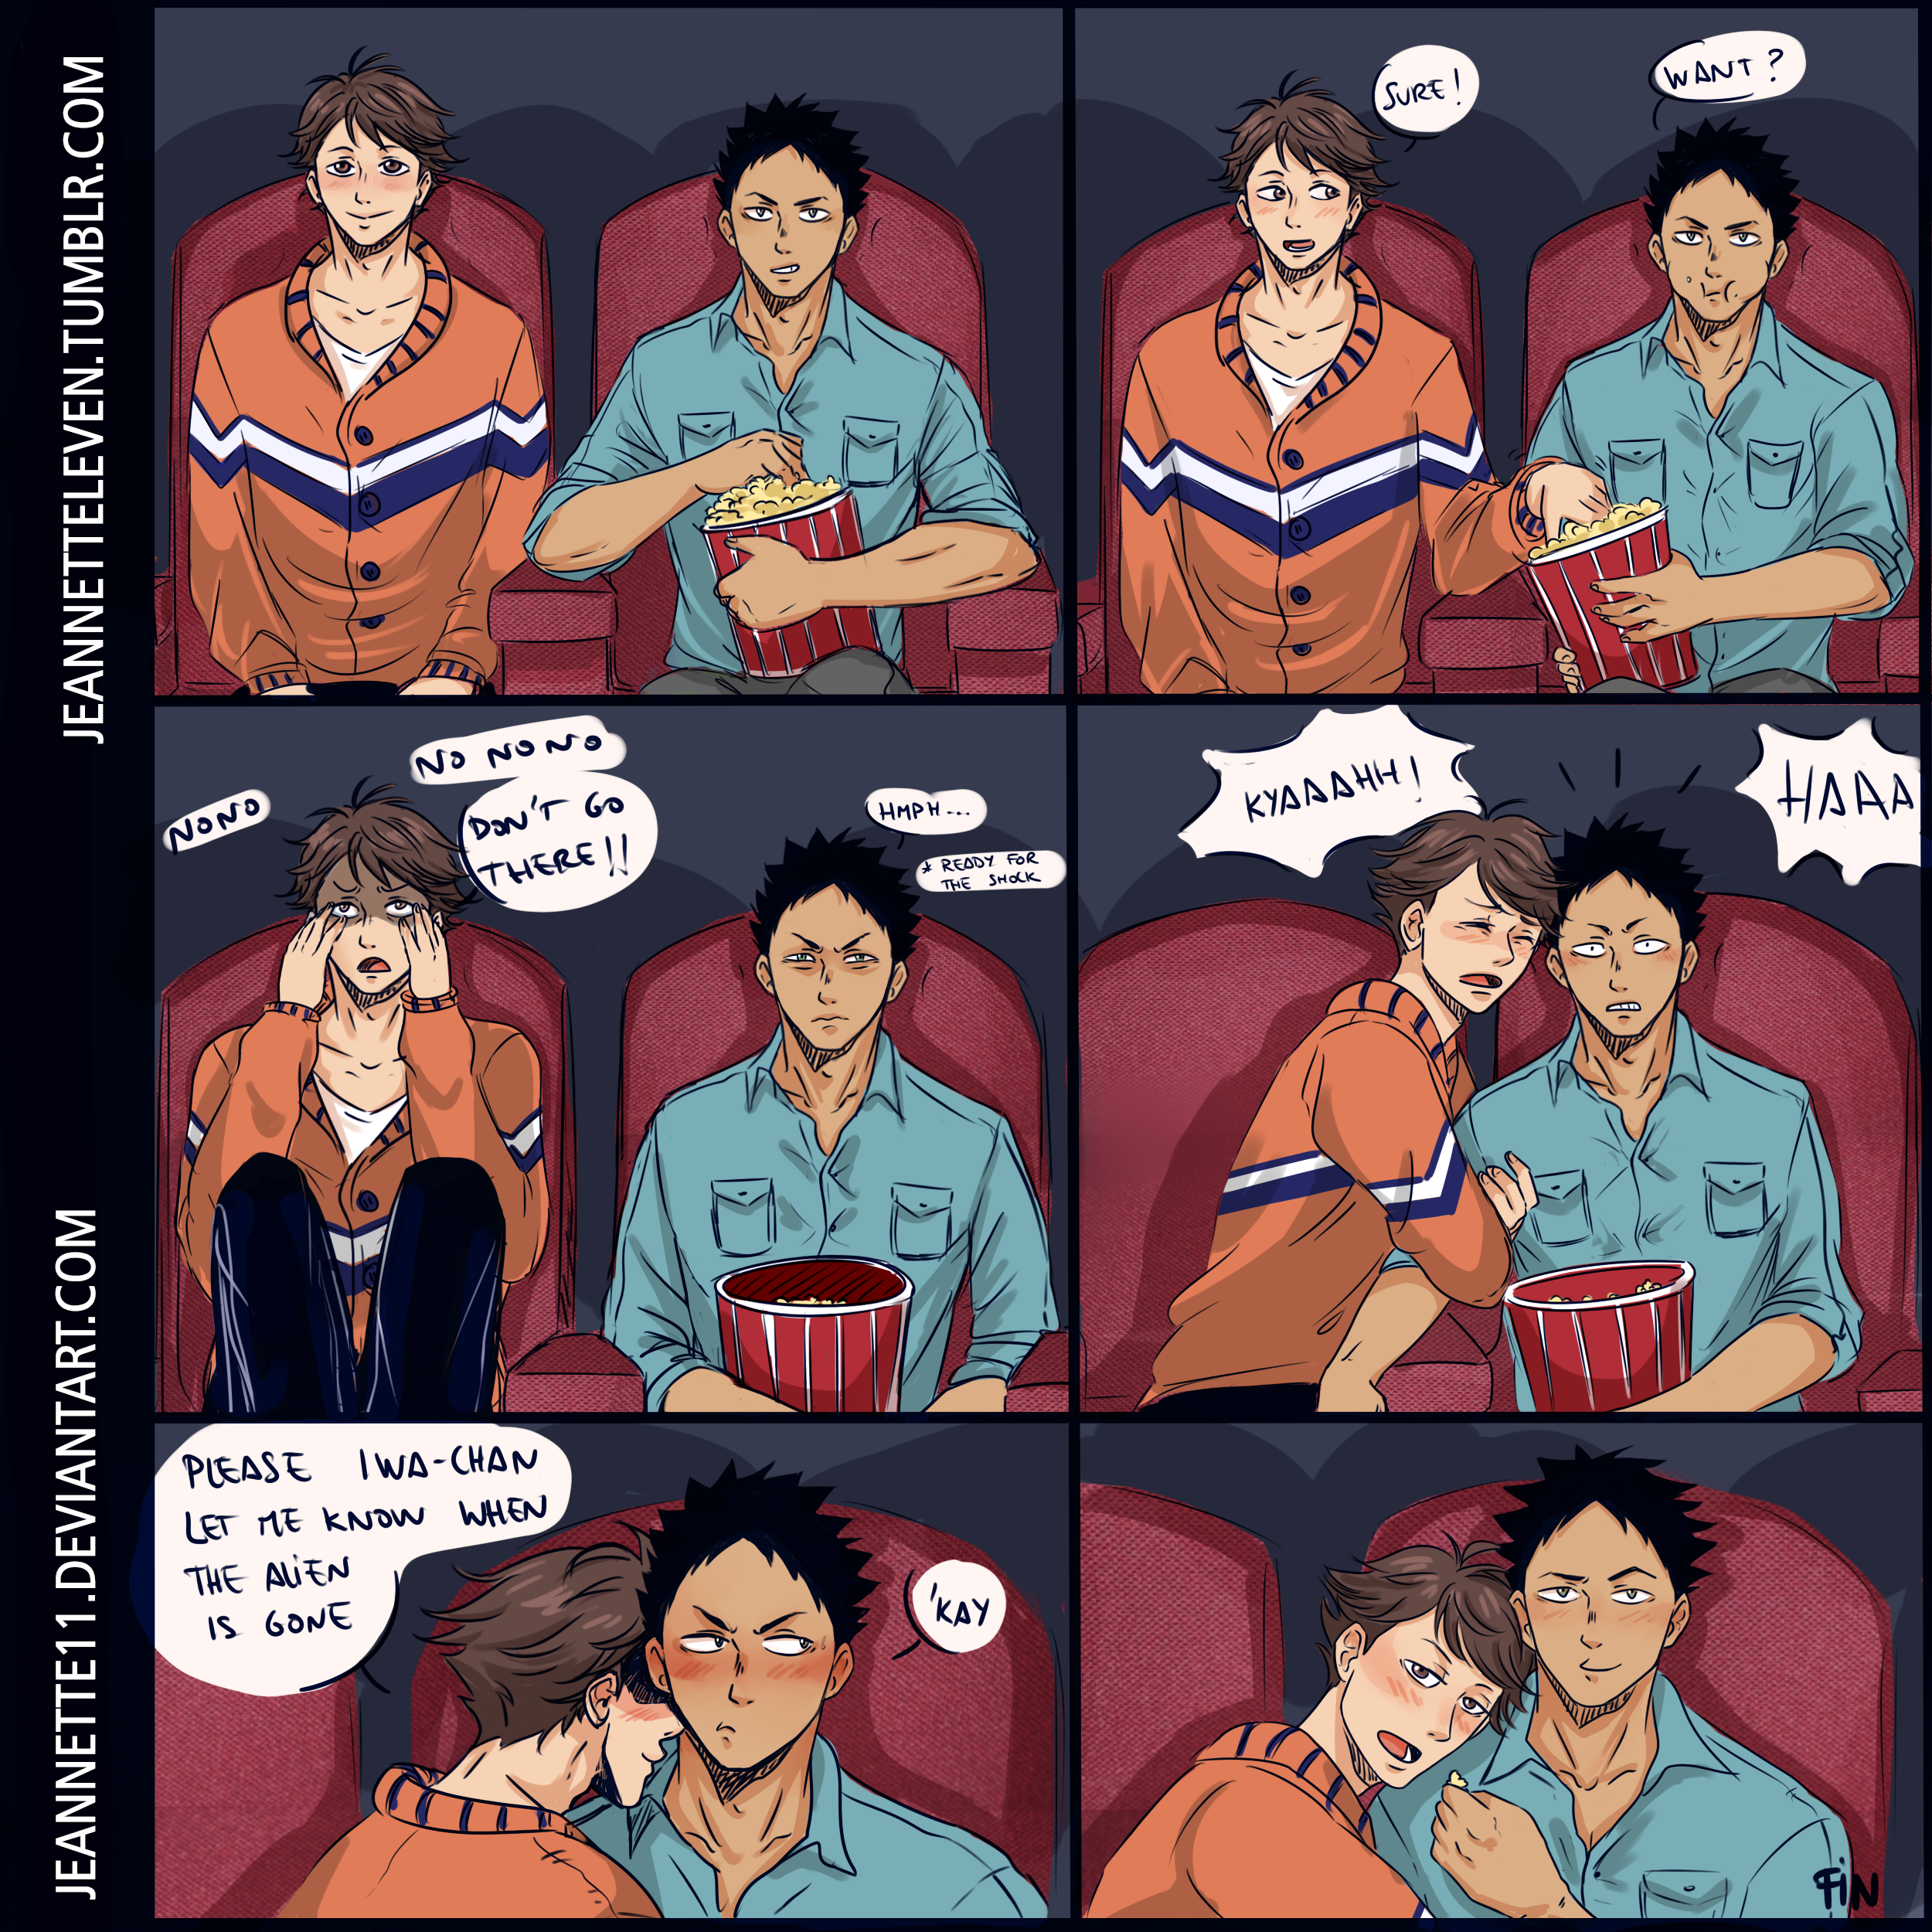 oikawa_and_iwa_chan_in_the_cinema_by_jeannette11-d8qjc0e